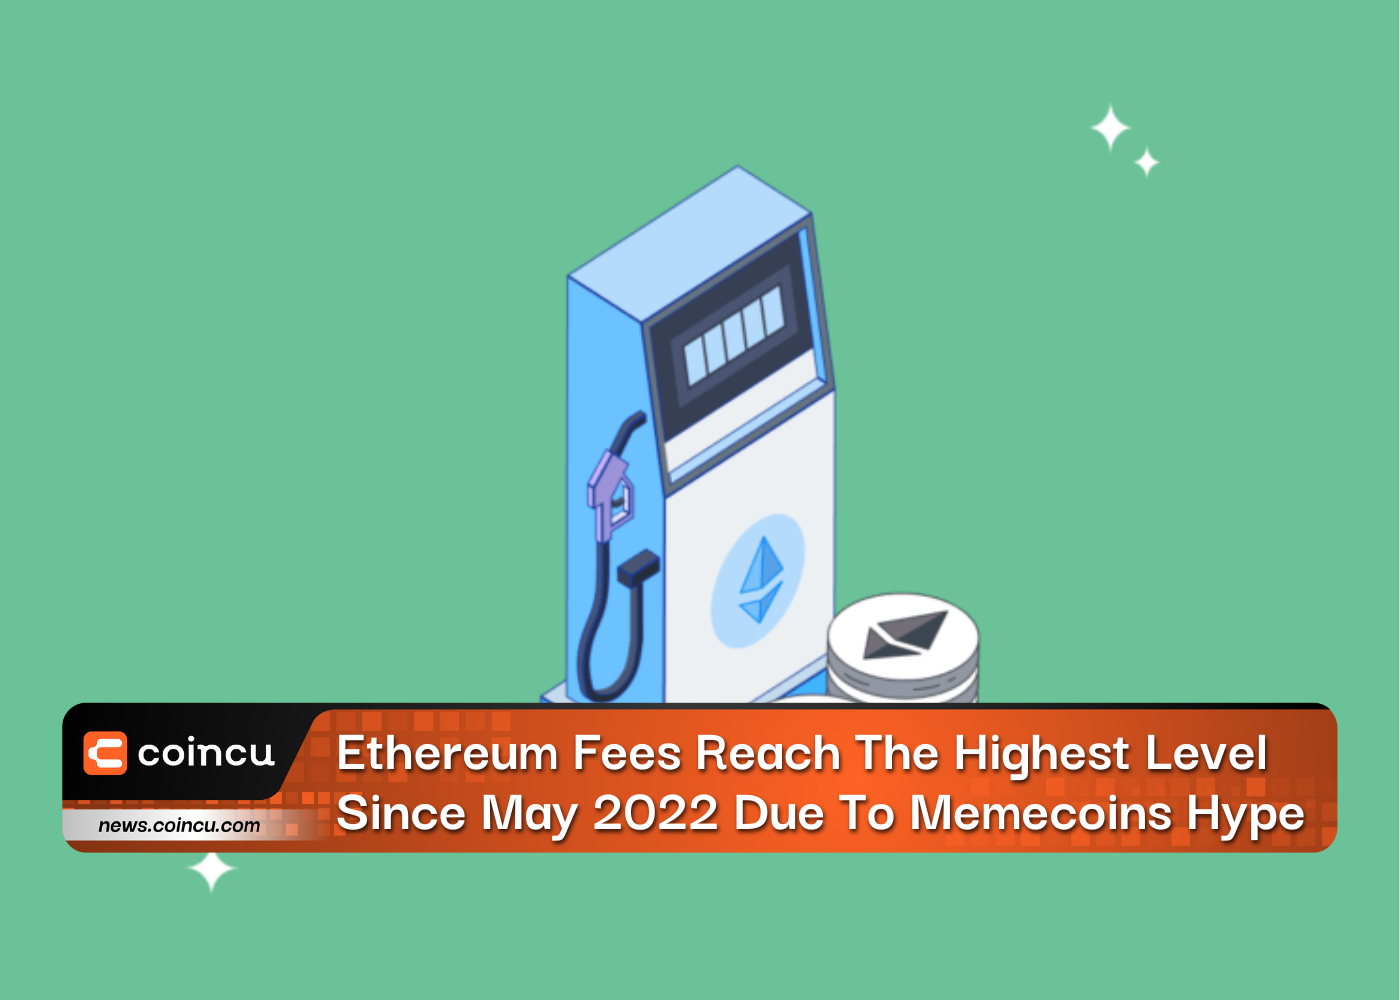 Ethereum Fees Reach The Highest Level Since May 2022 Due To Memecoins Hype